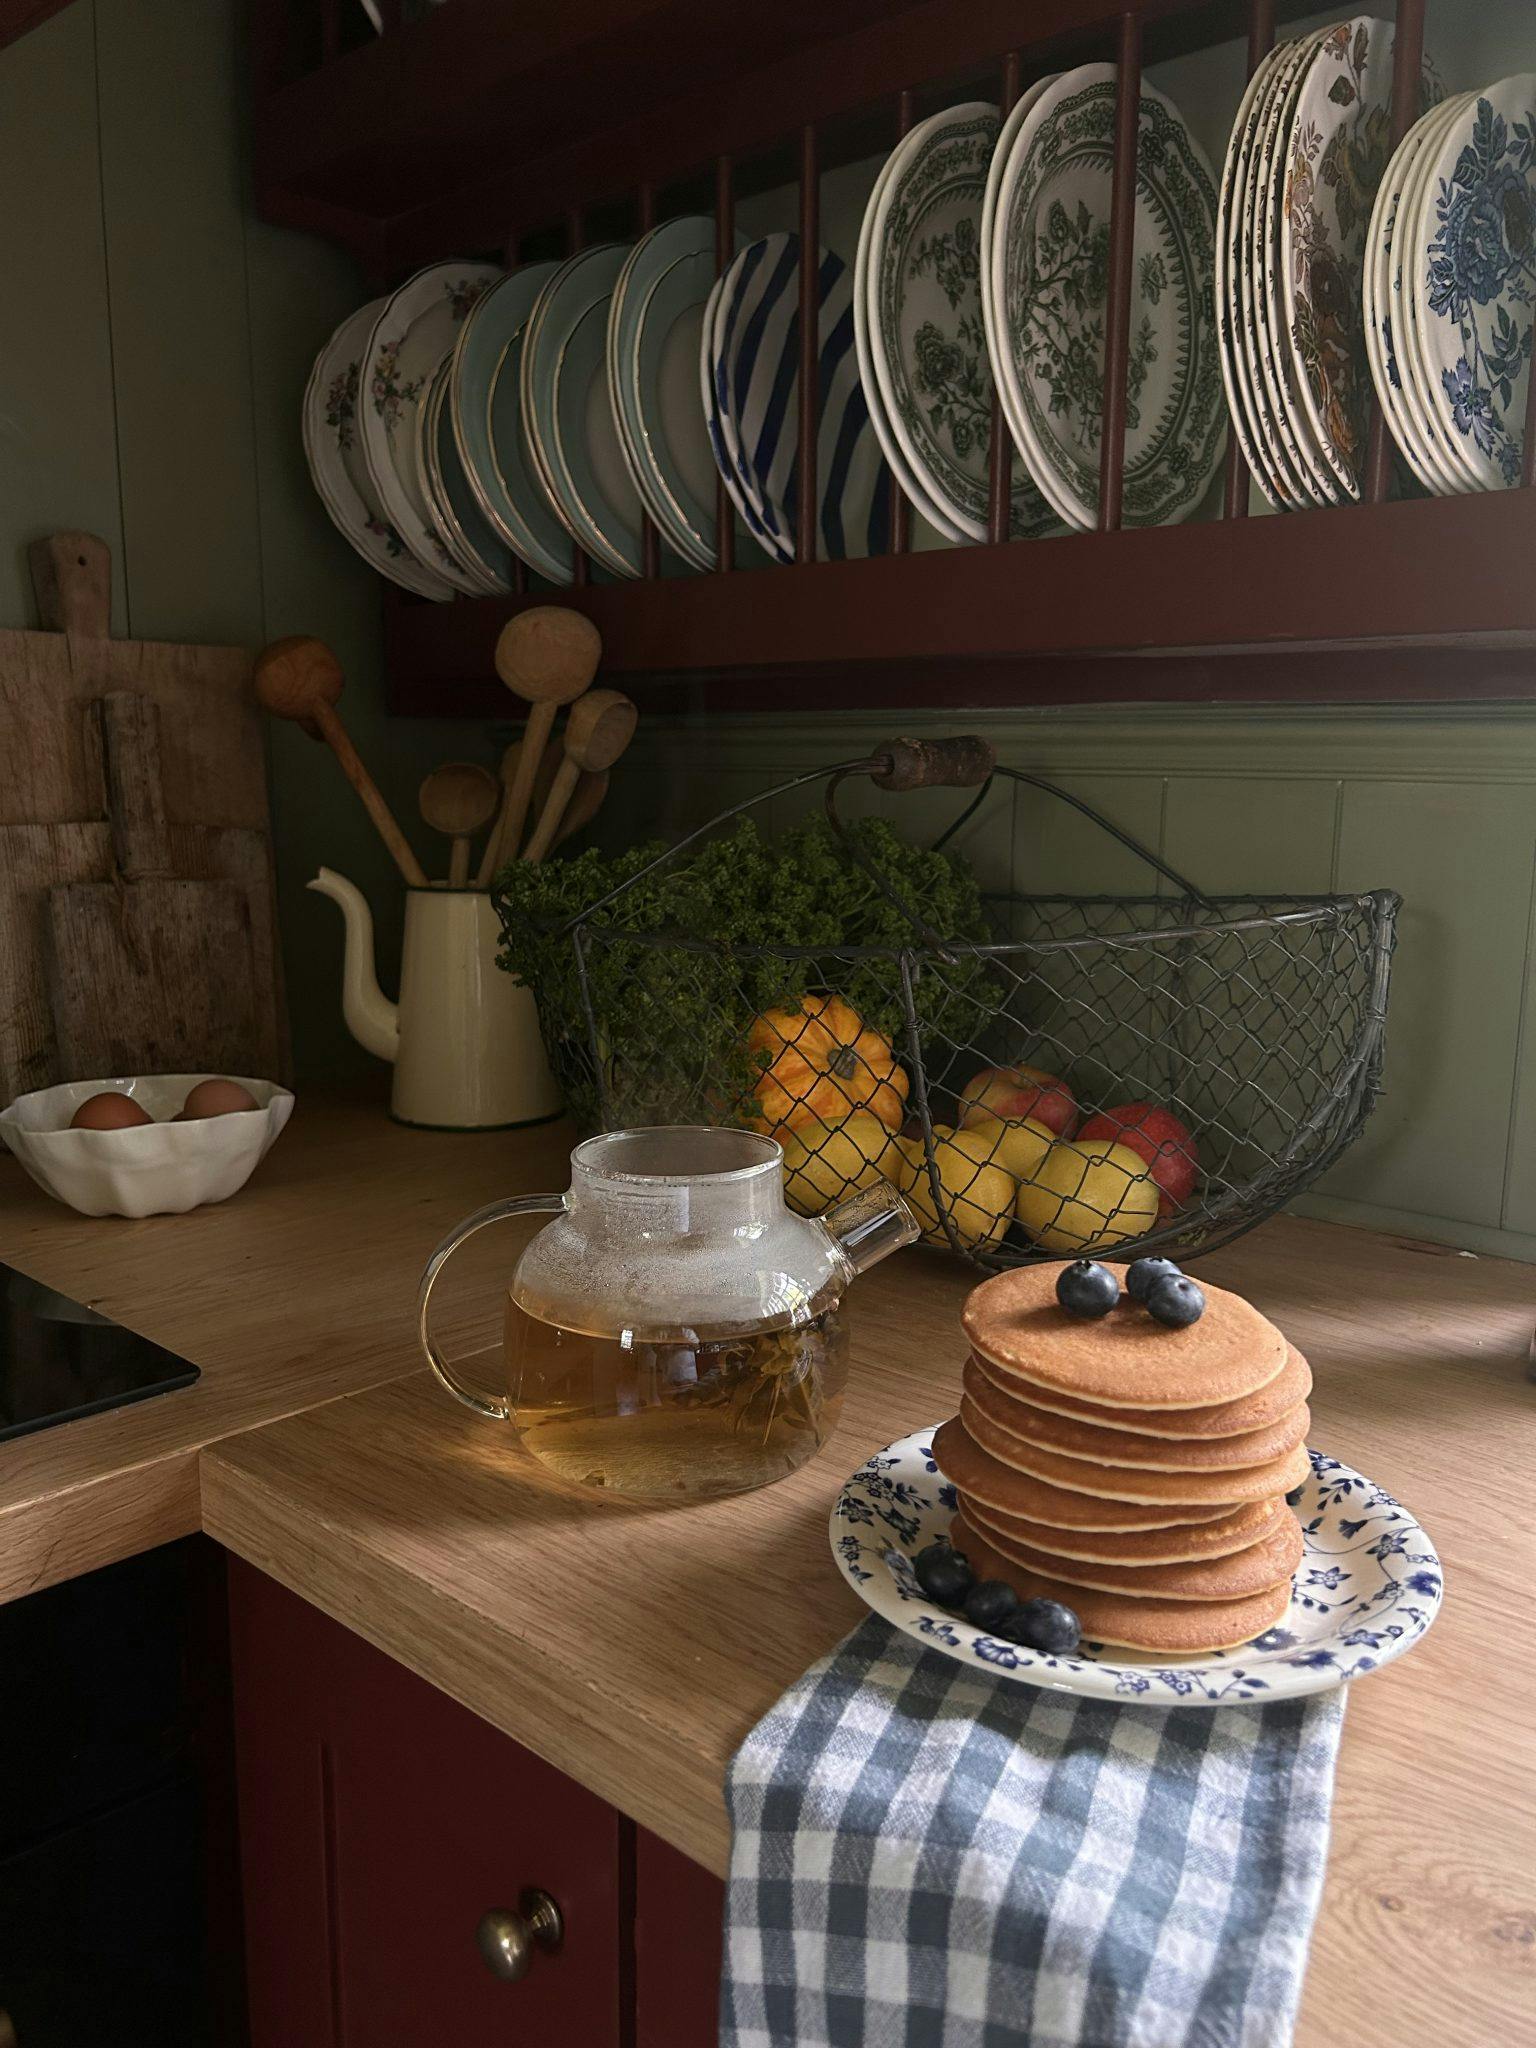 Pancakes and tea to enjoy in the kitchen at La Roquerie